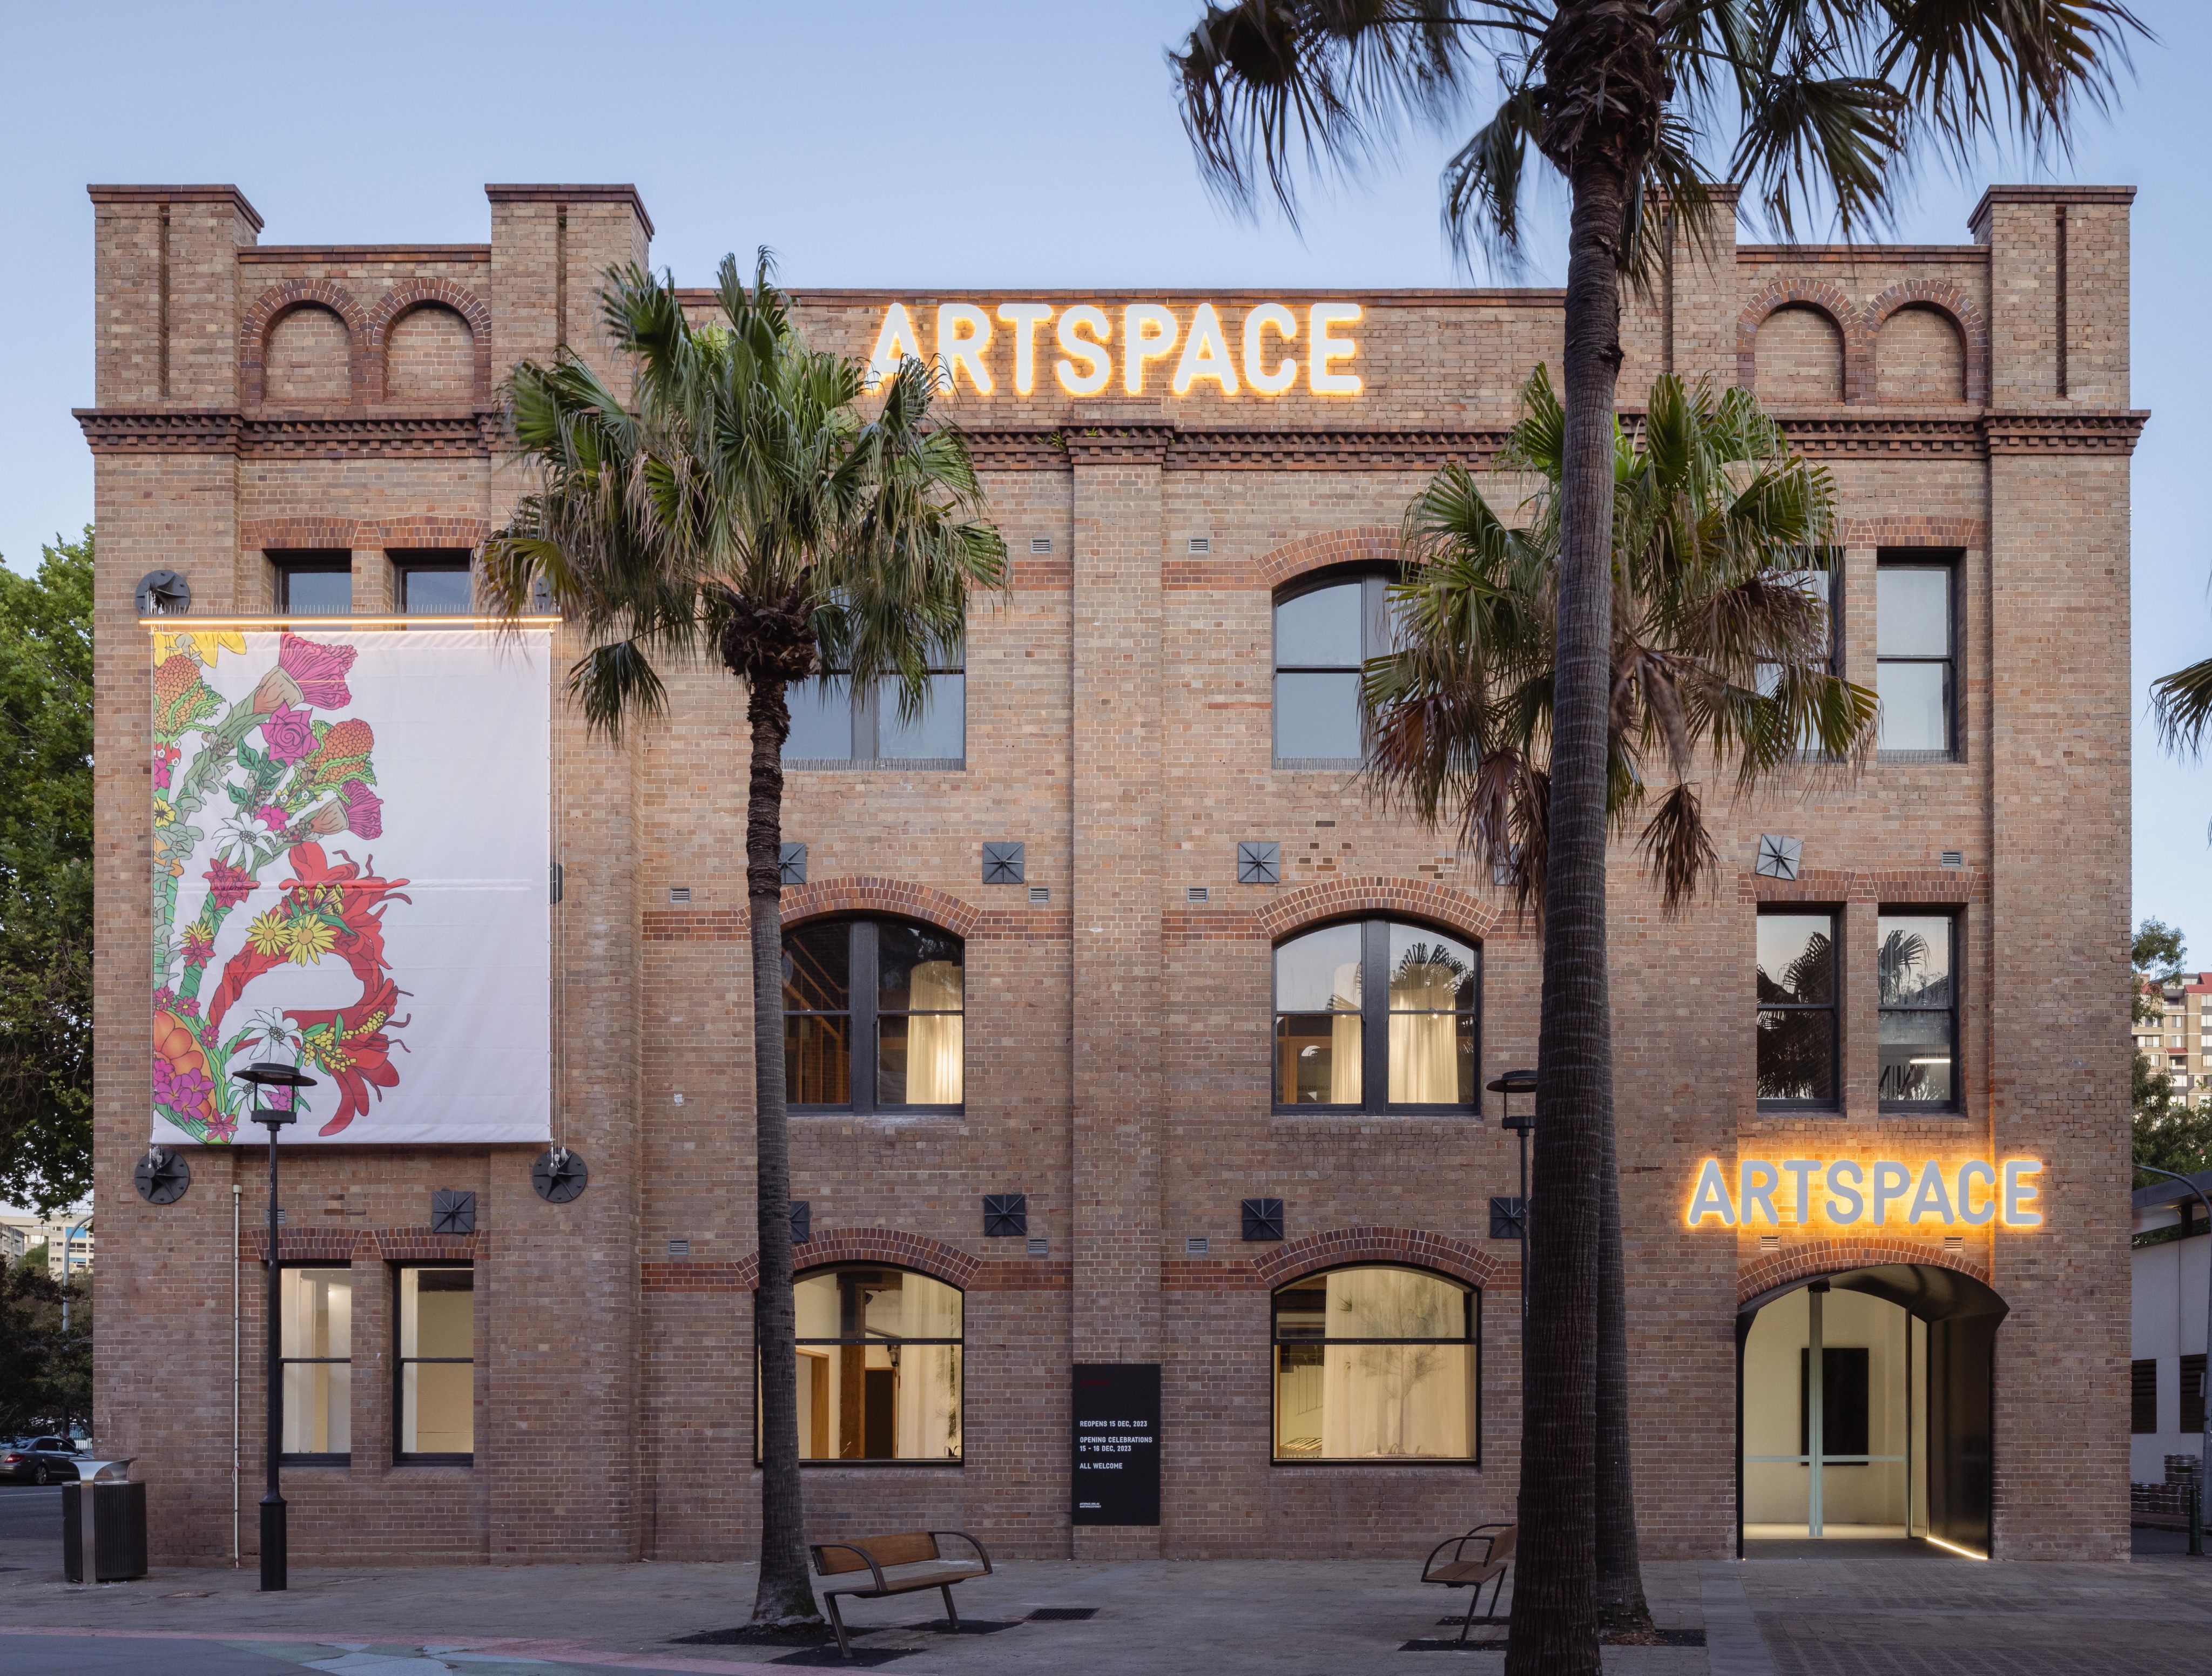 Sydney’s Artspace will reopen on December 15, 2023. after three years of renovations. Ahead of the reopening, its executive director talks about serving the community, and networking in Asia. Photo: Katherine Lu